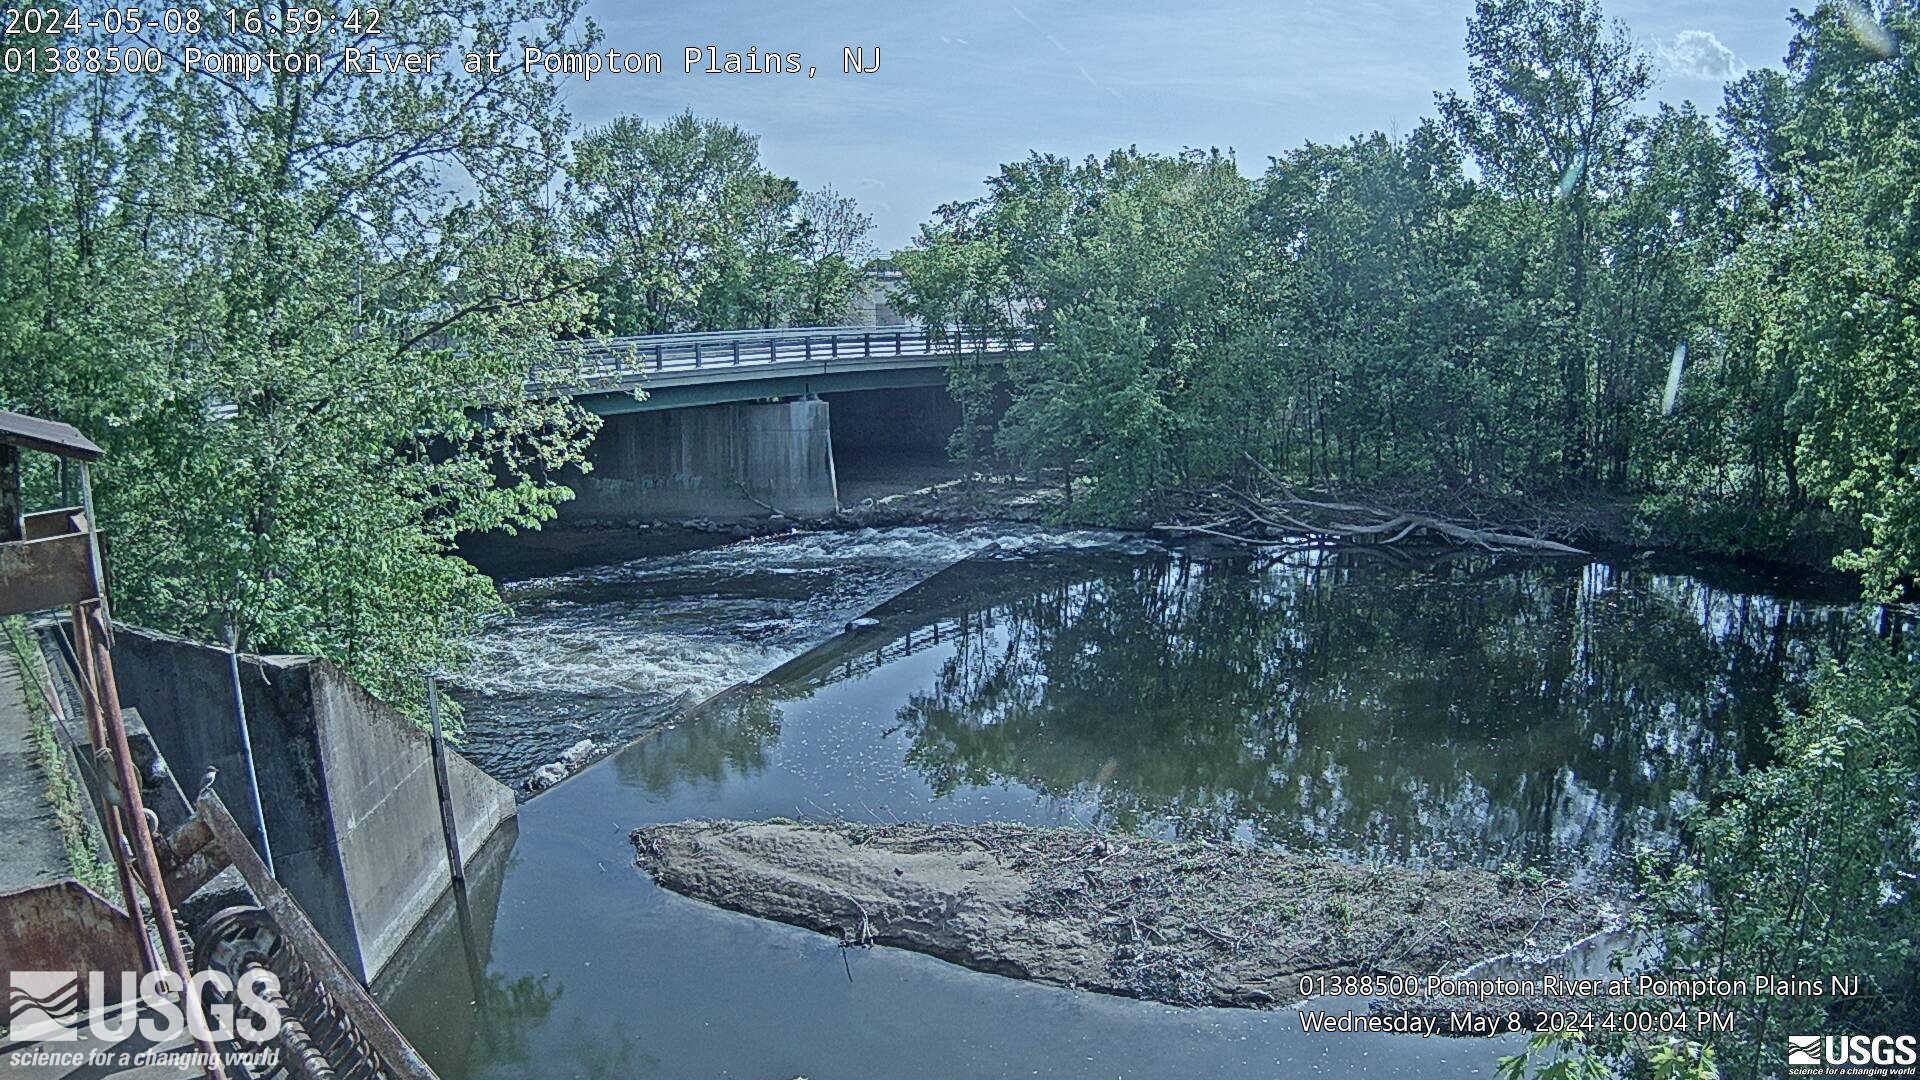 View of the weir and Bridge at Pompton Plains